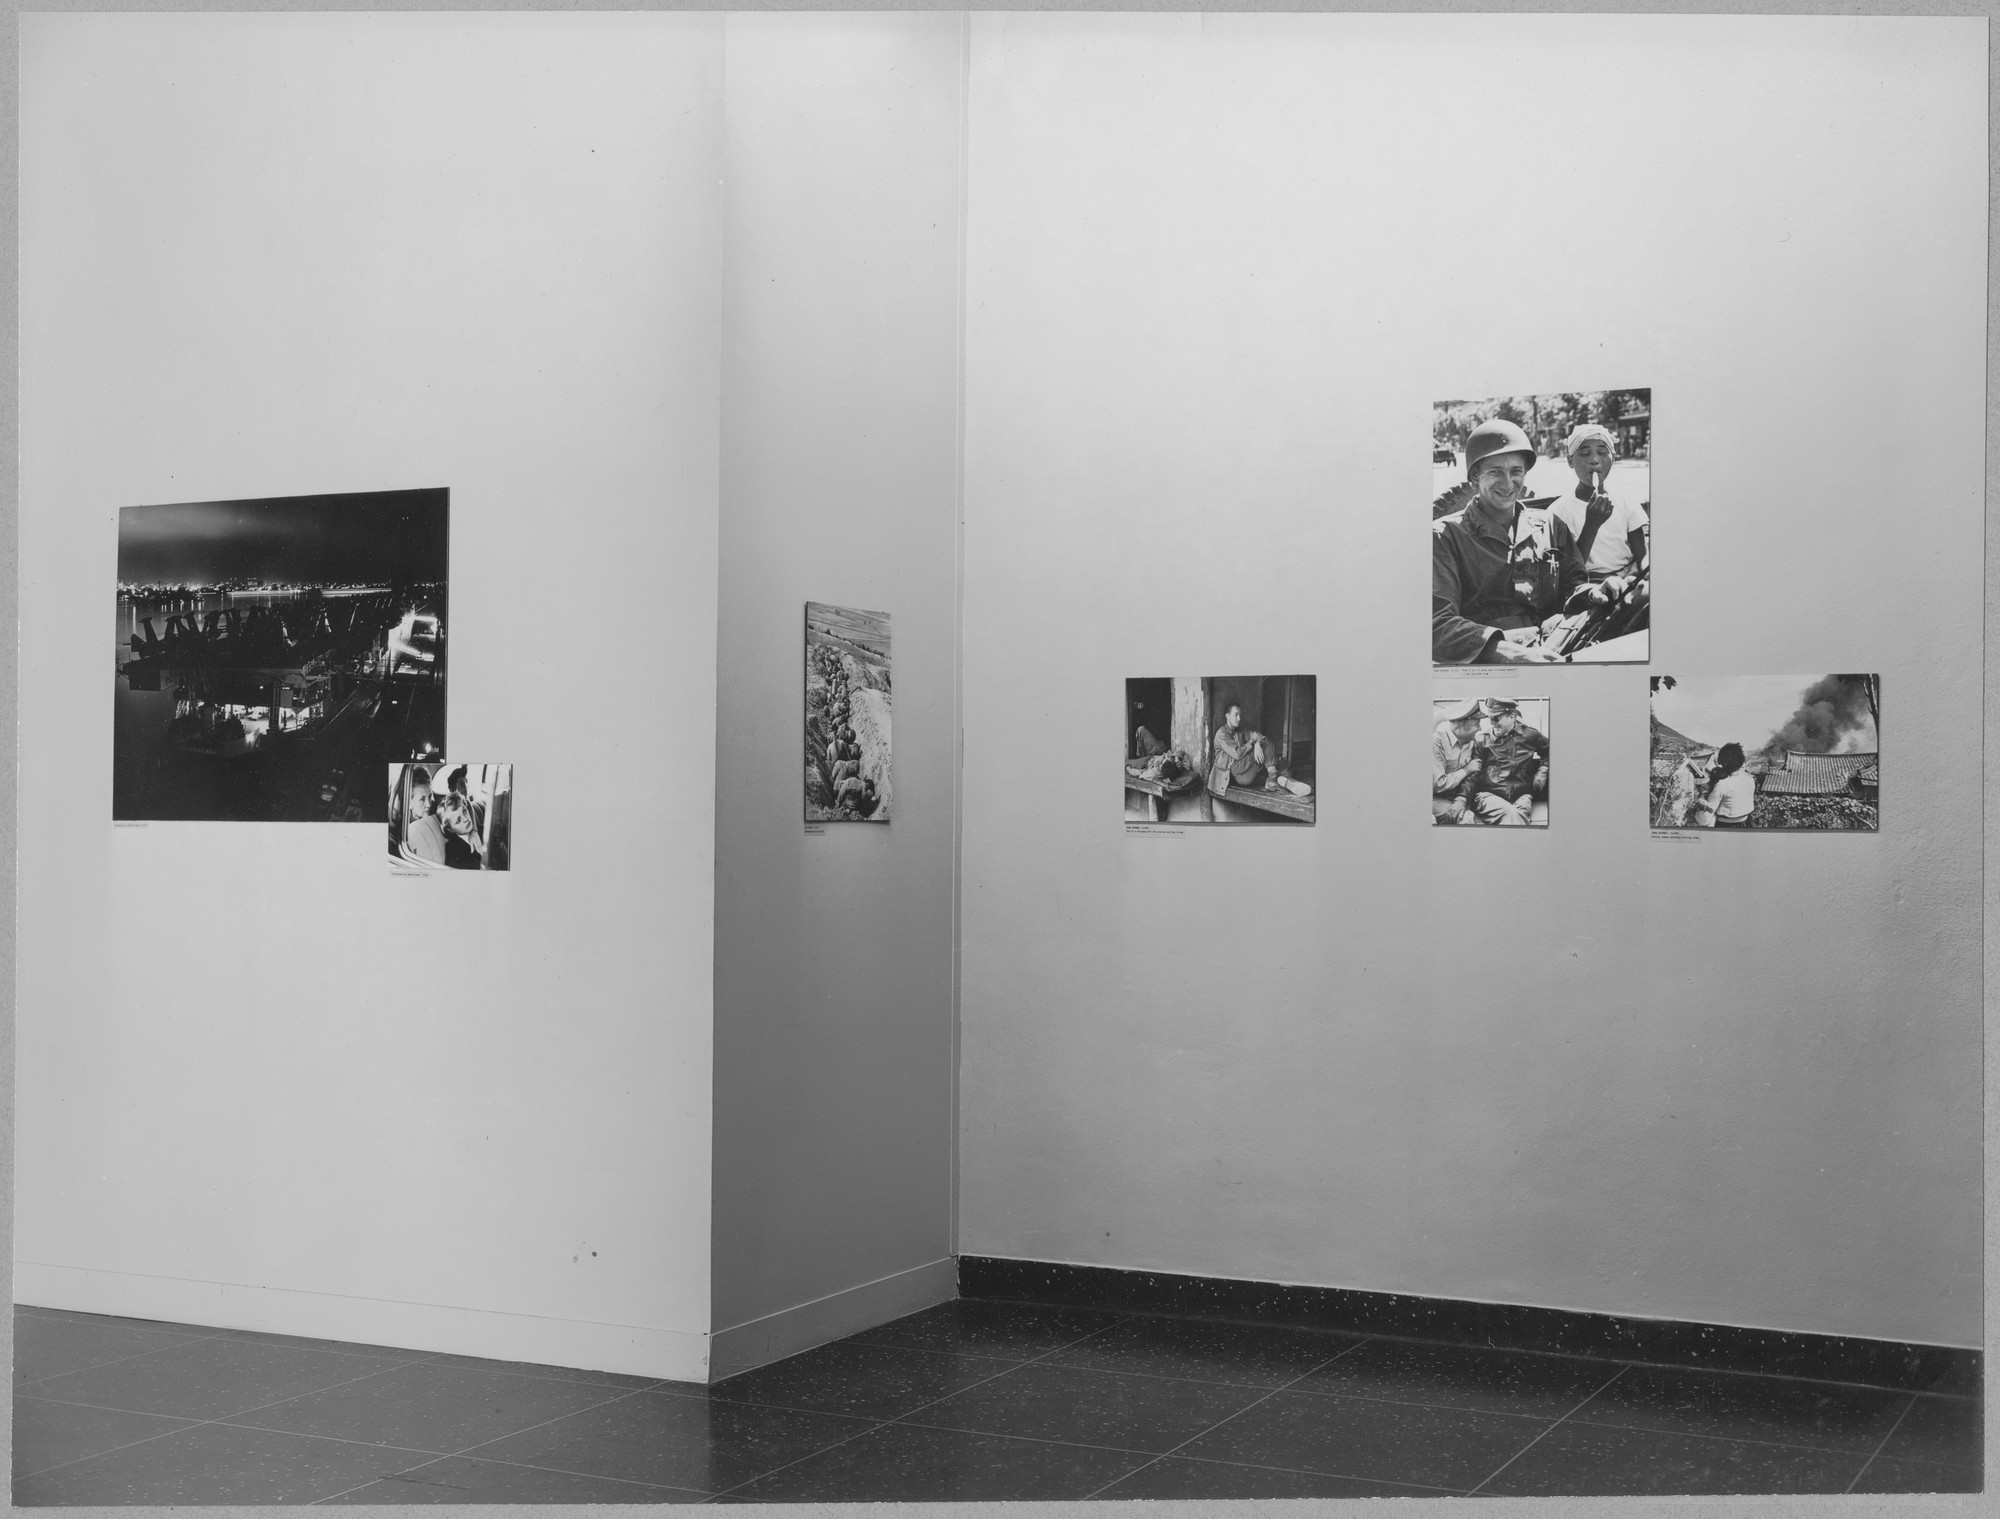 Installation view at the exhibition, 